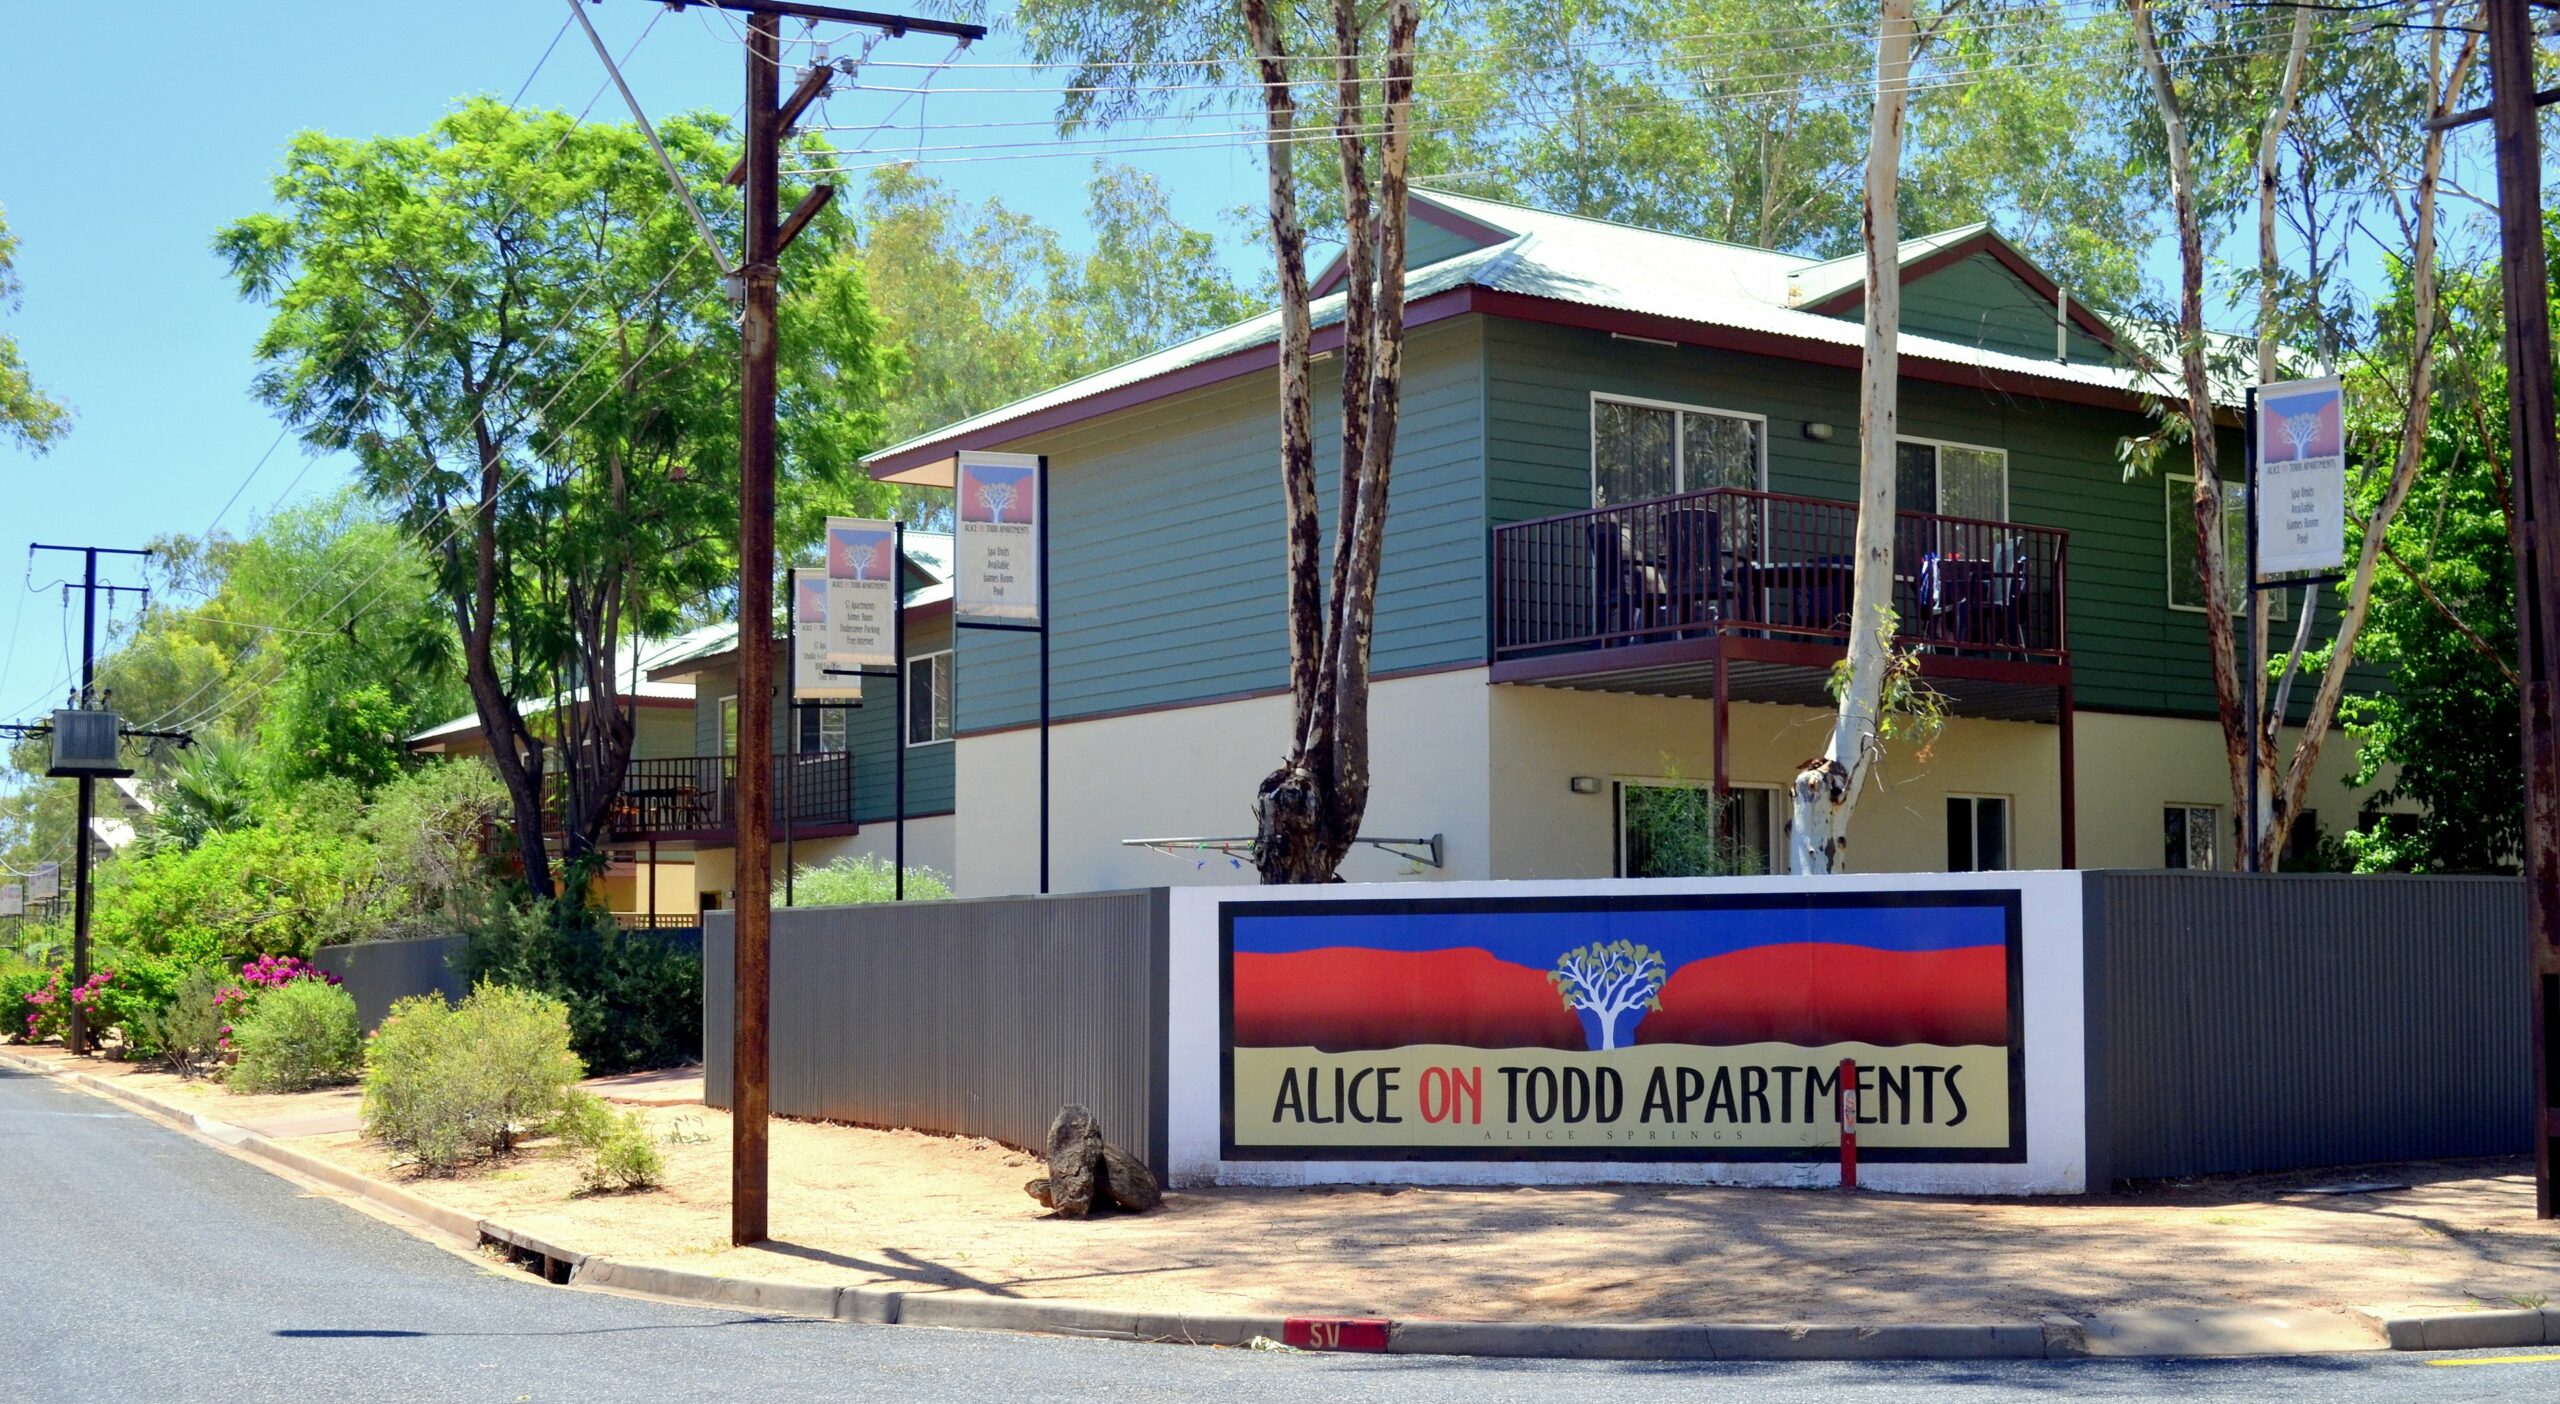 Alice on Todd Apartments